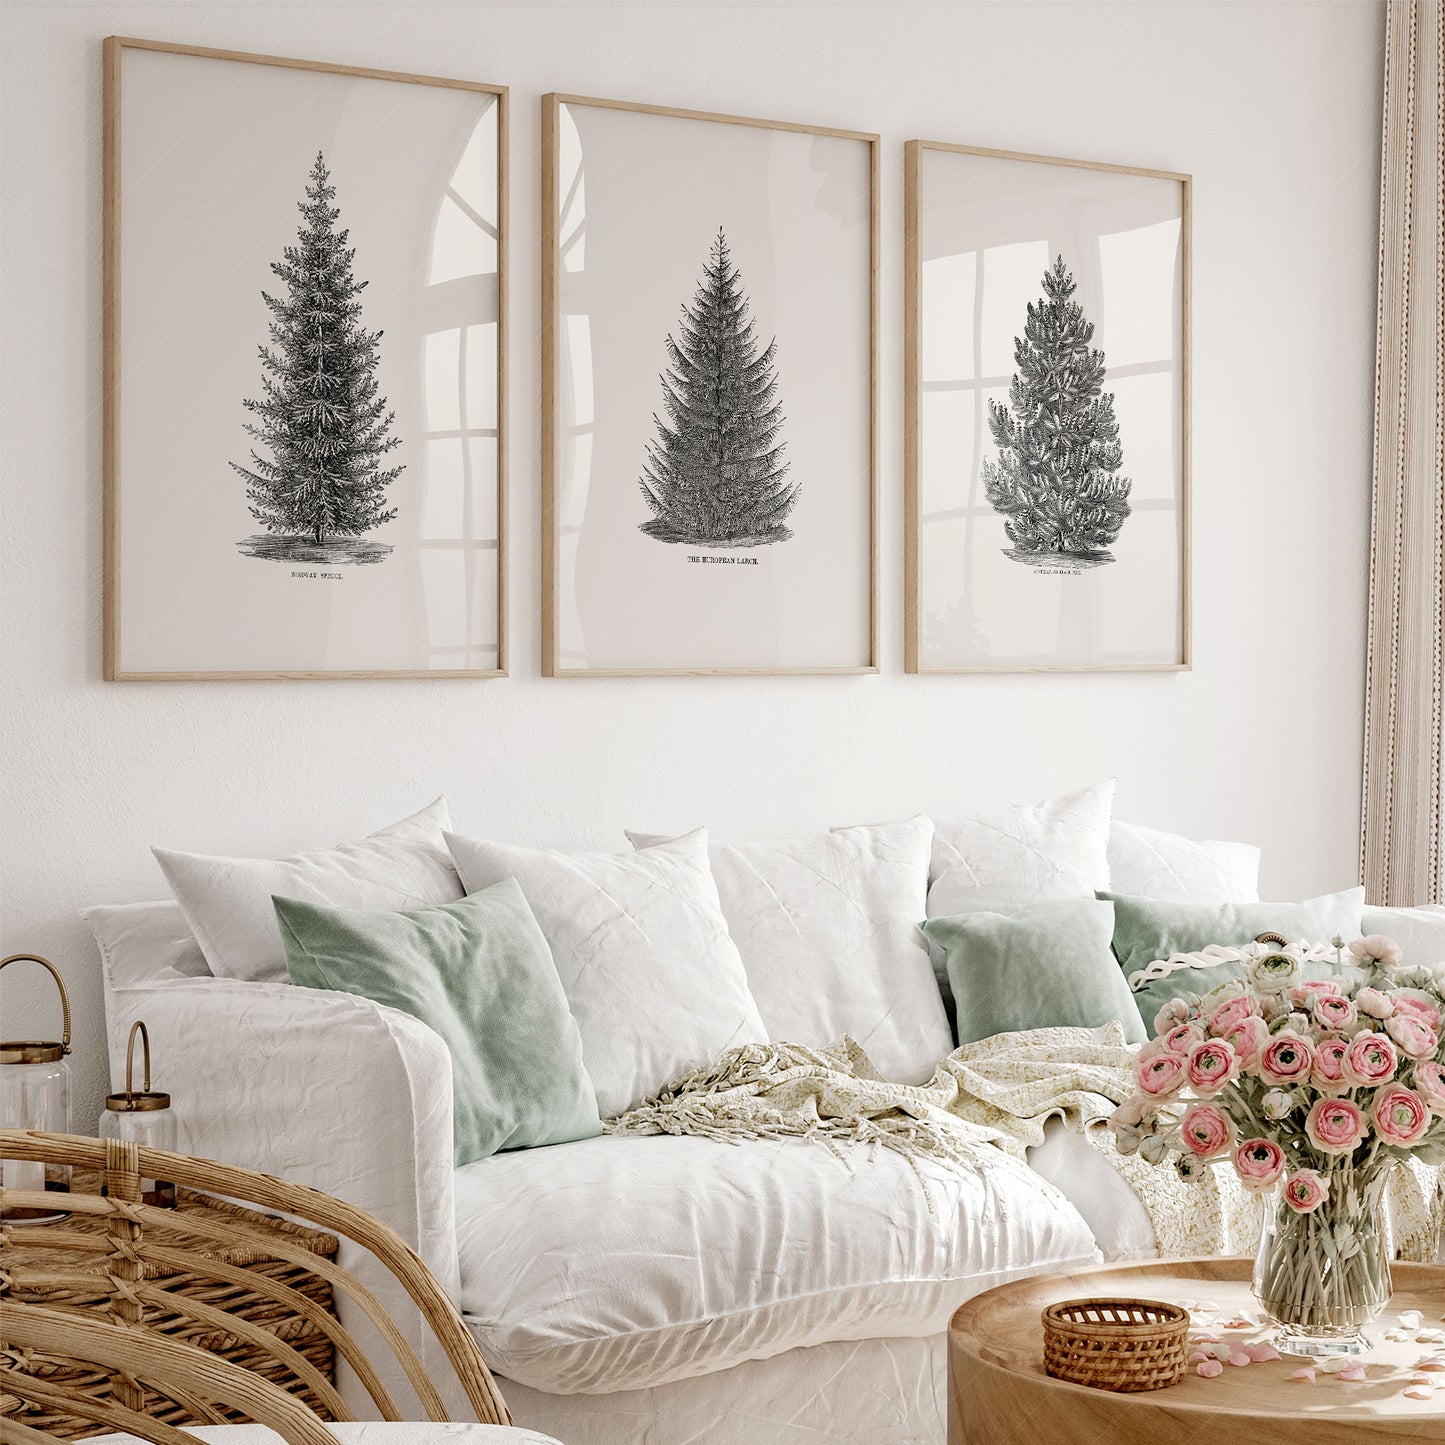 Norway Spruce Trees Wall Art, Set of 3 Prints